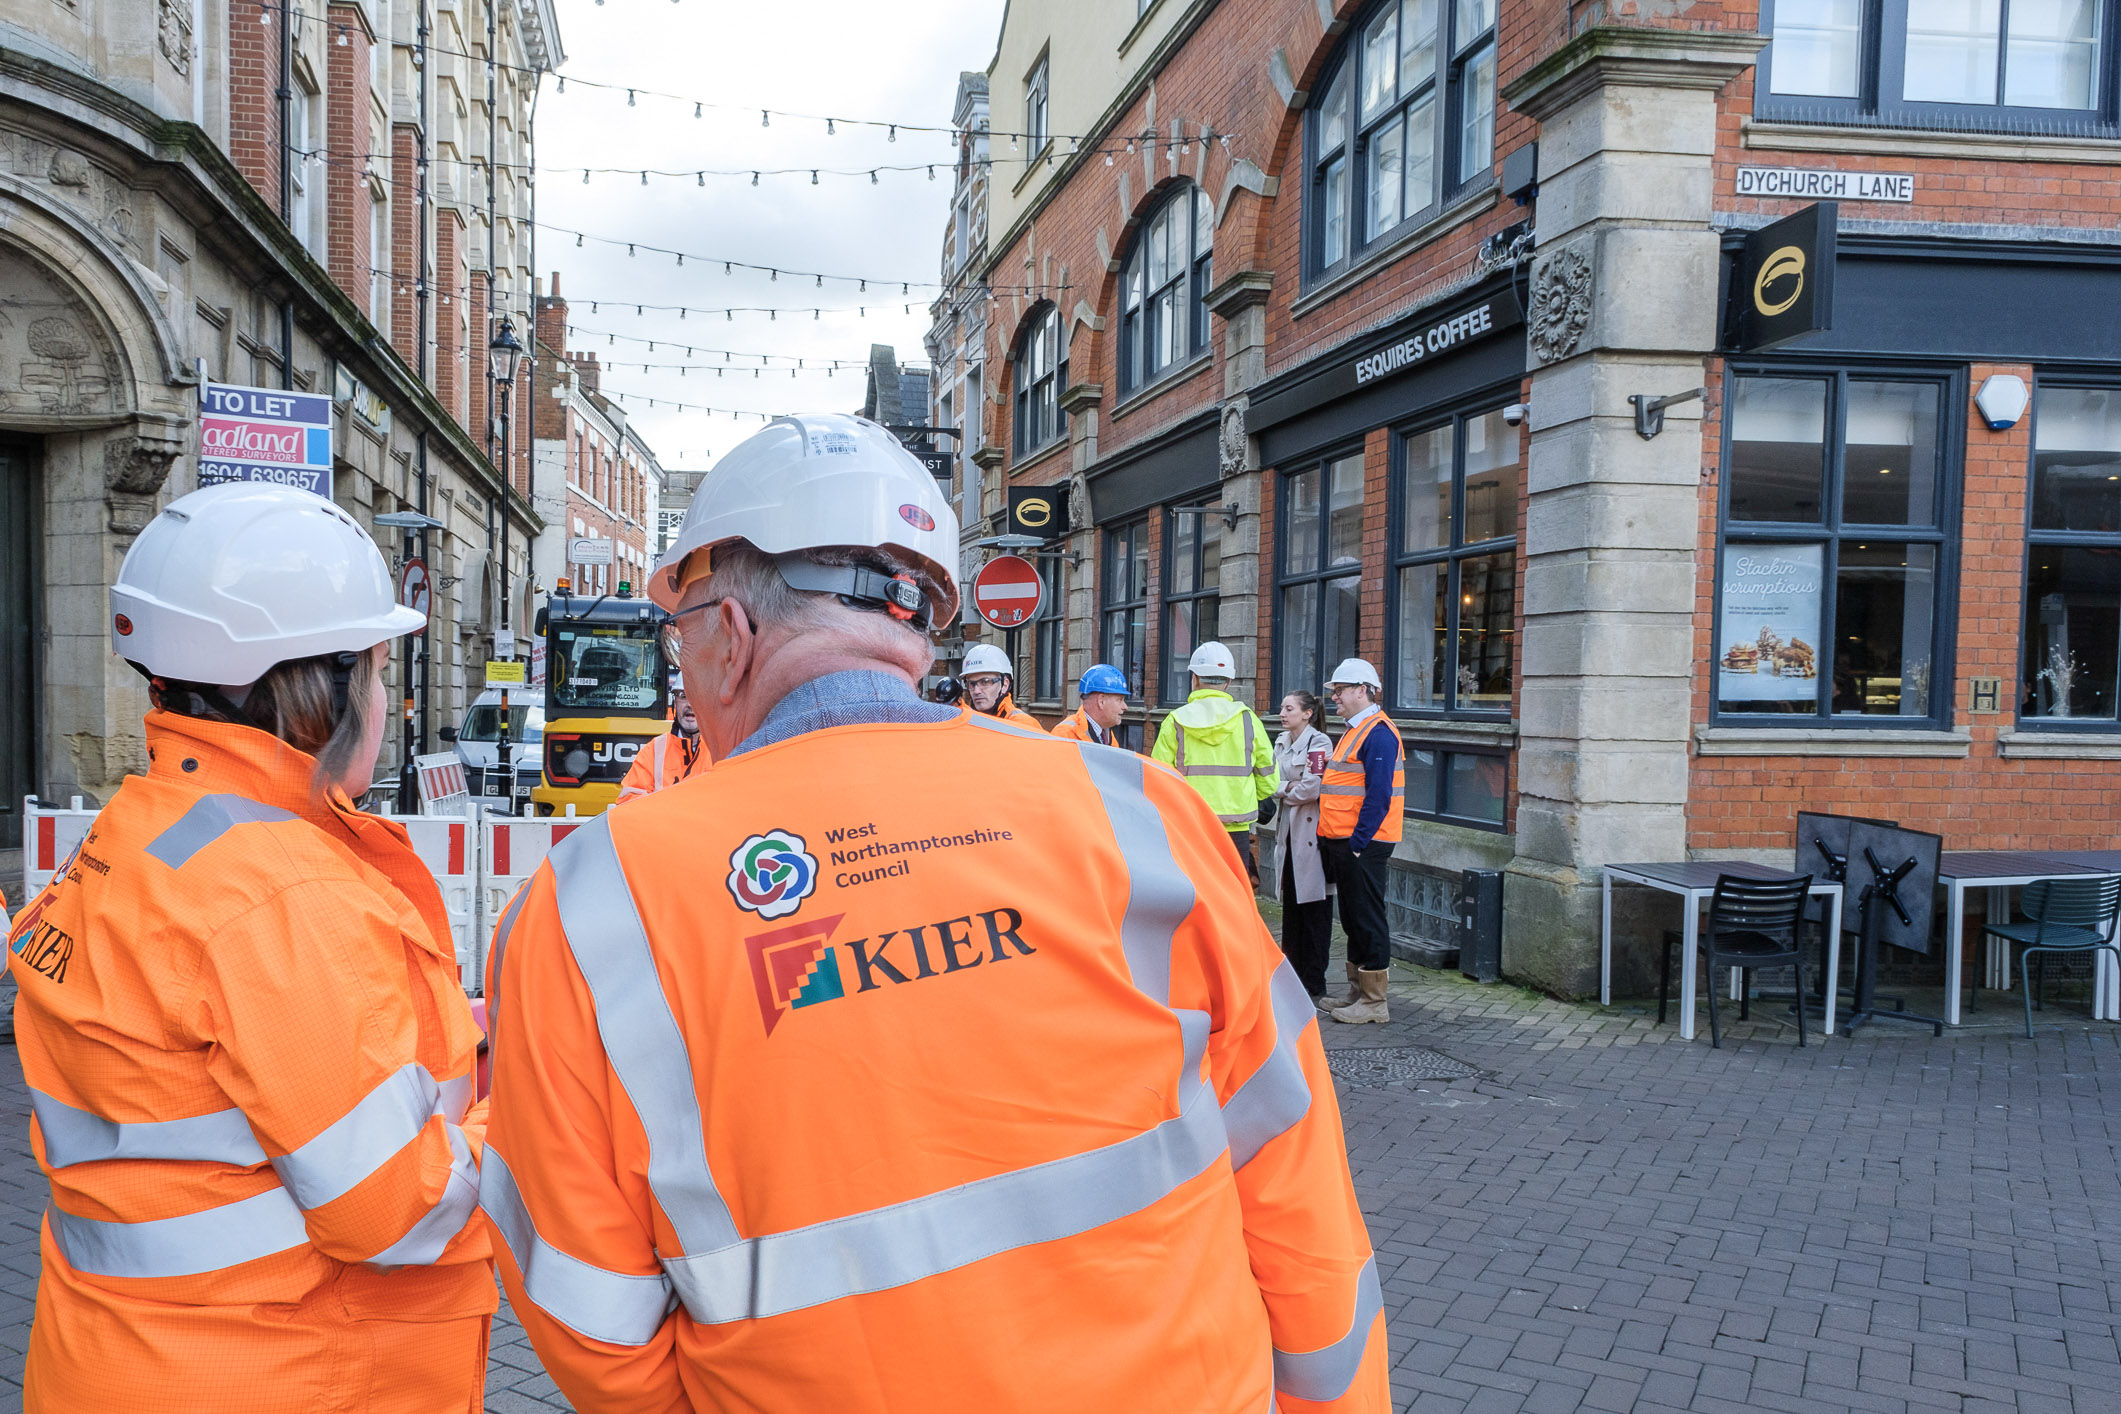 Two workers in WNC Keir branded high-viz jackets look at construction work taking place on Fish Street